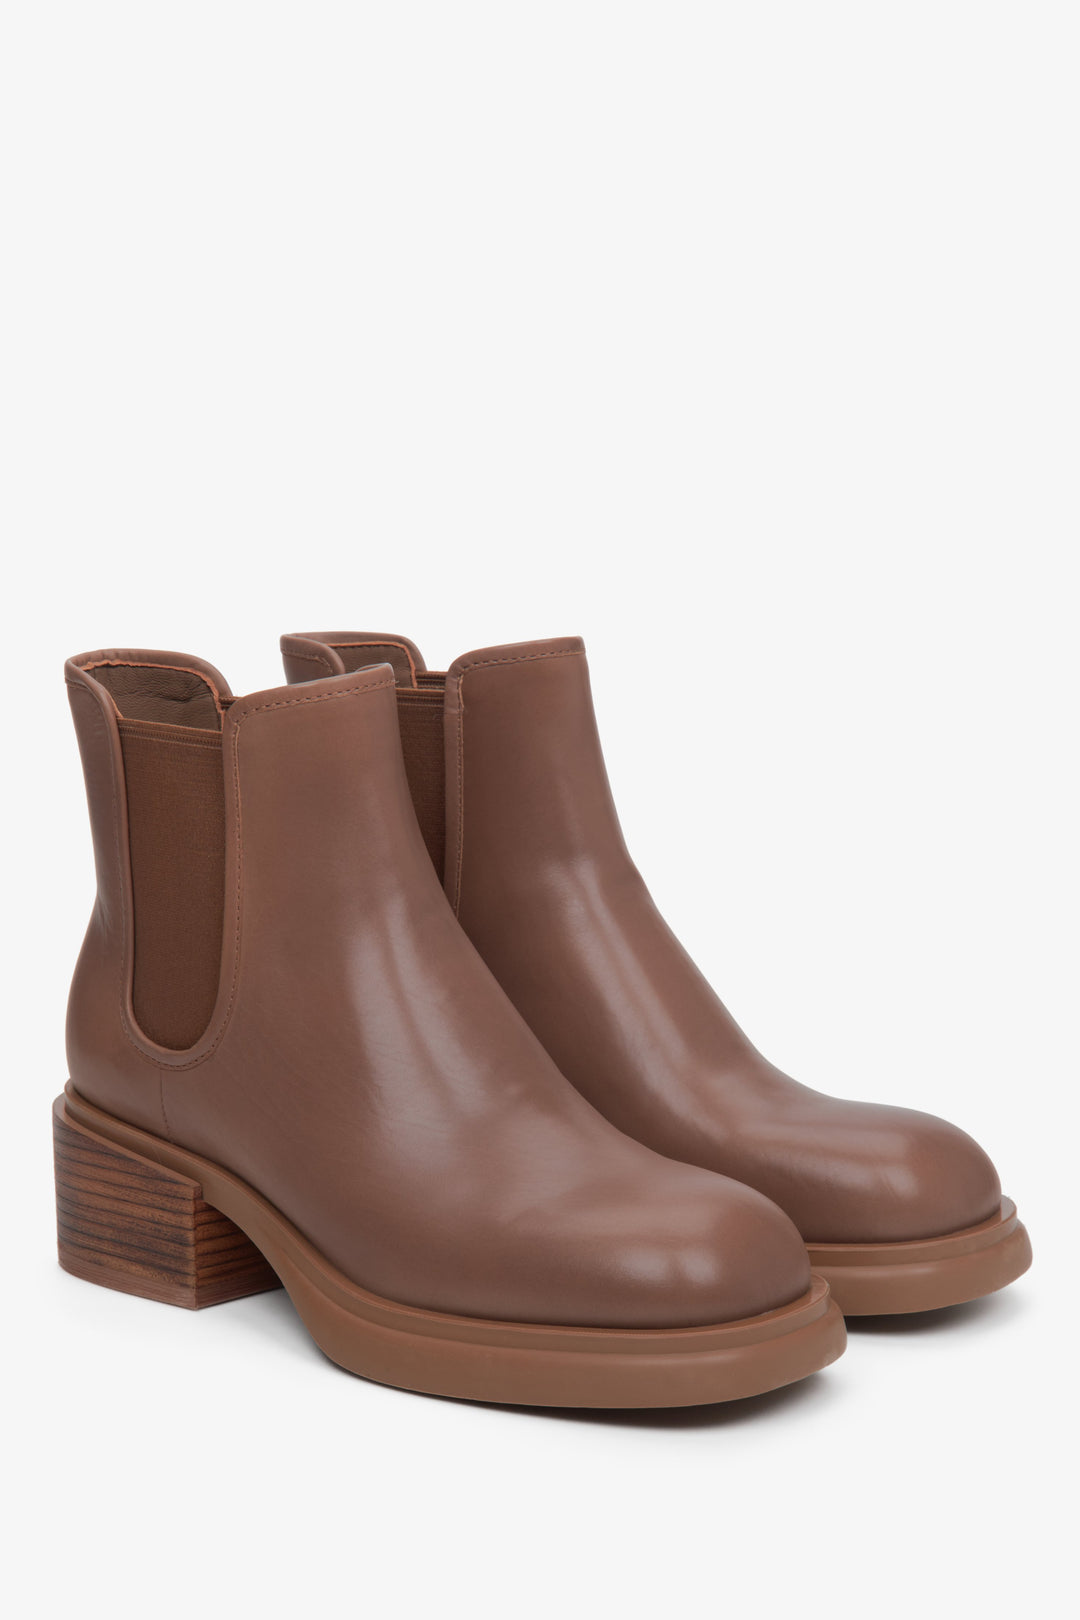 Women's brown ankle boots with a block heel.